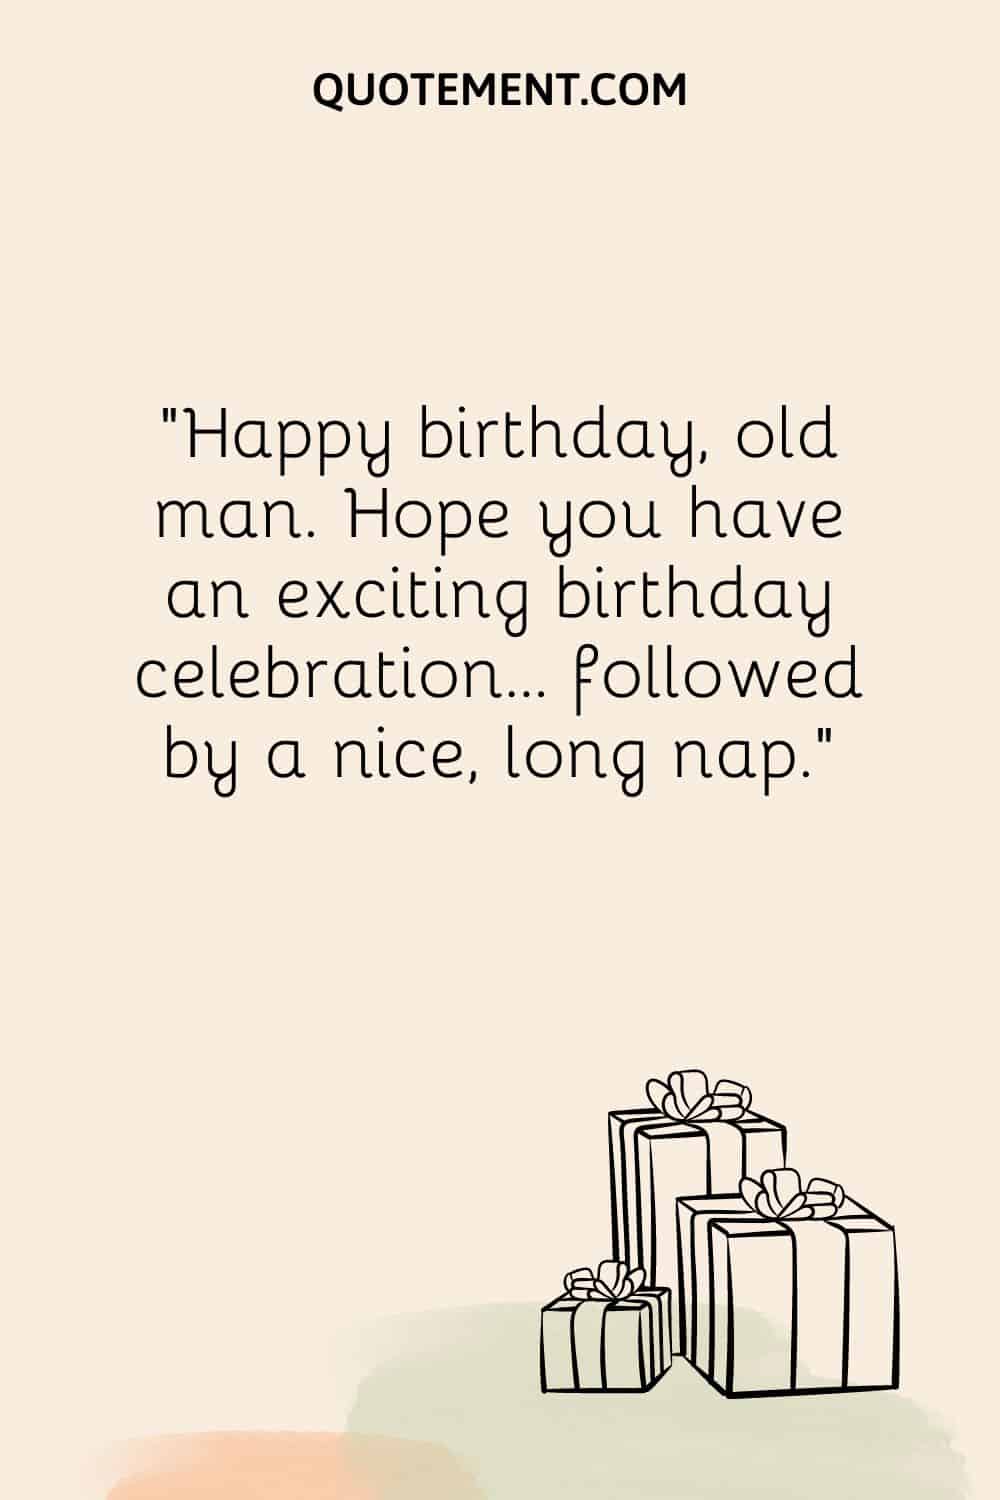 Happy birthday, old man. Hope you have an exciting birthday celebration… followed by a nice, long nap